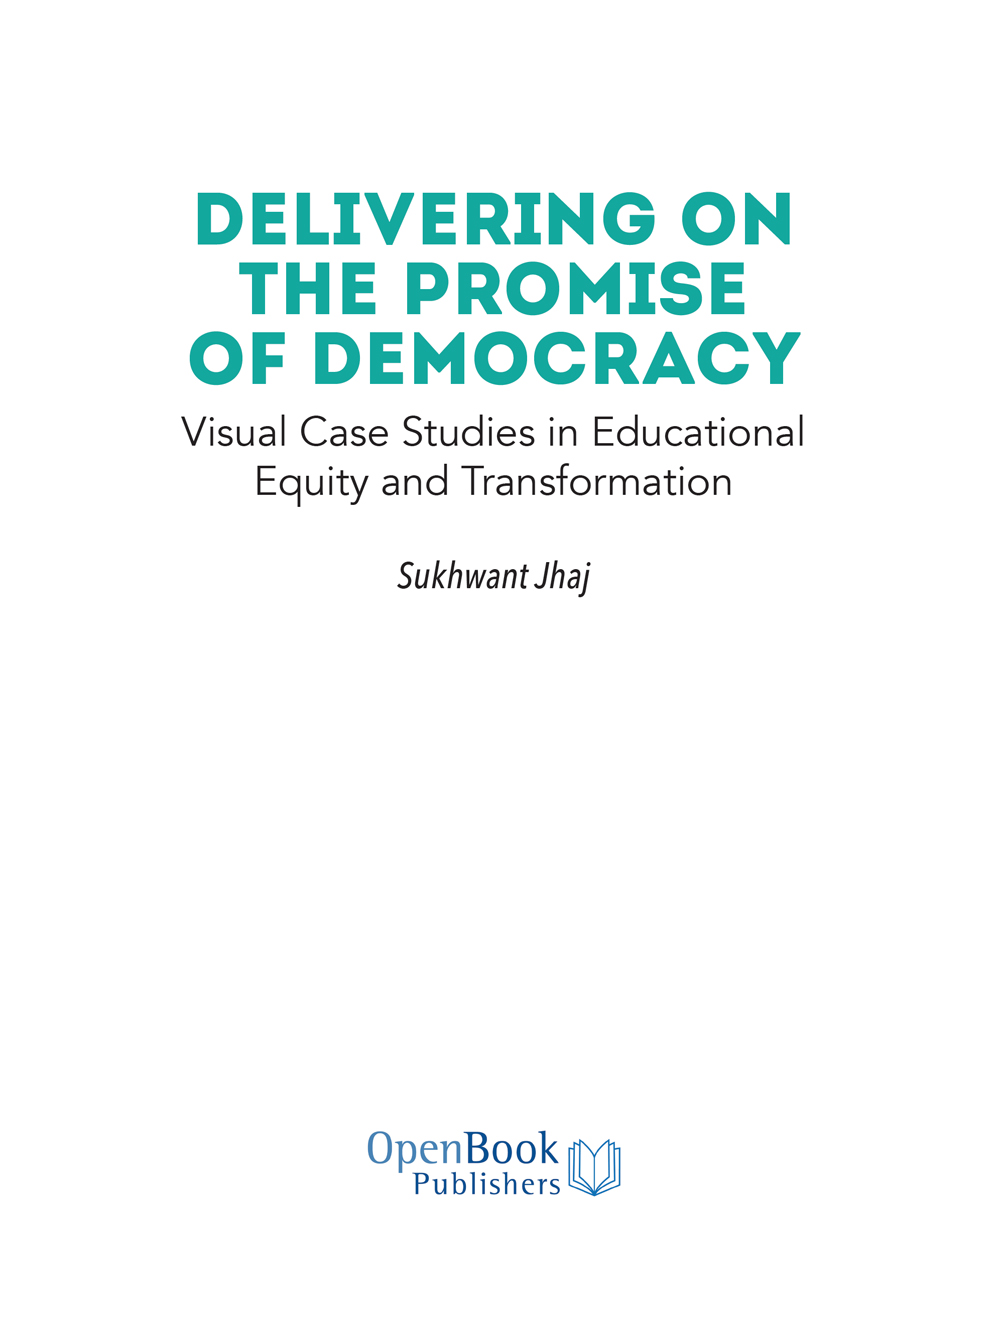 Title: Delivering on the Promise of Democracy